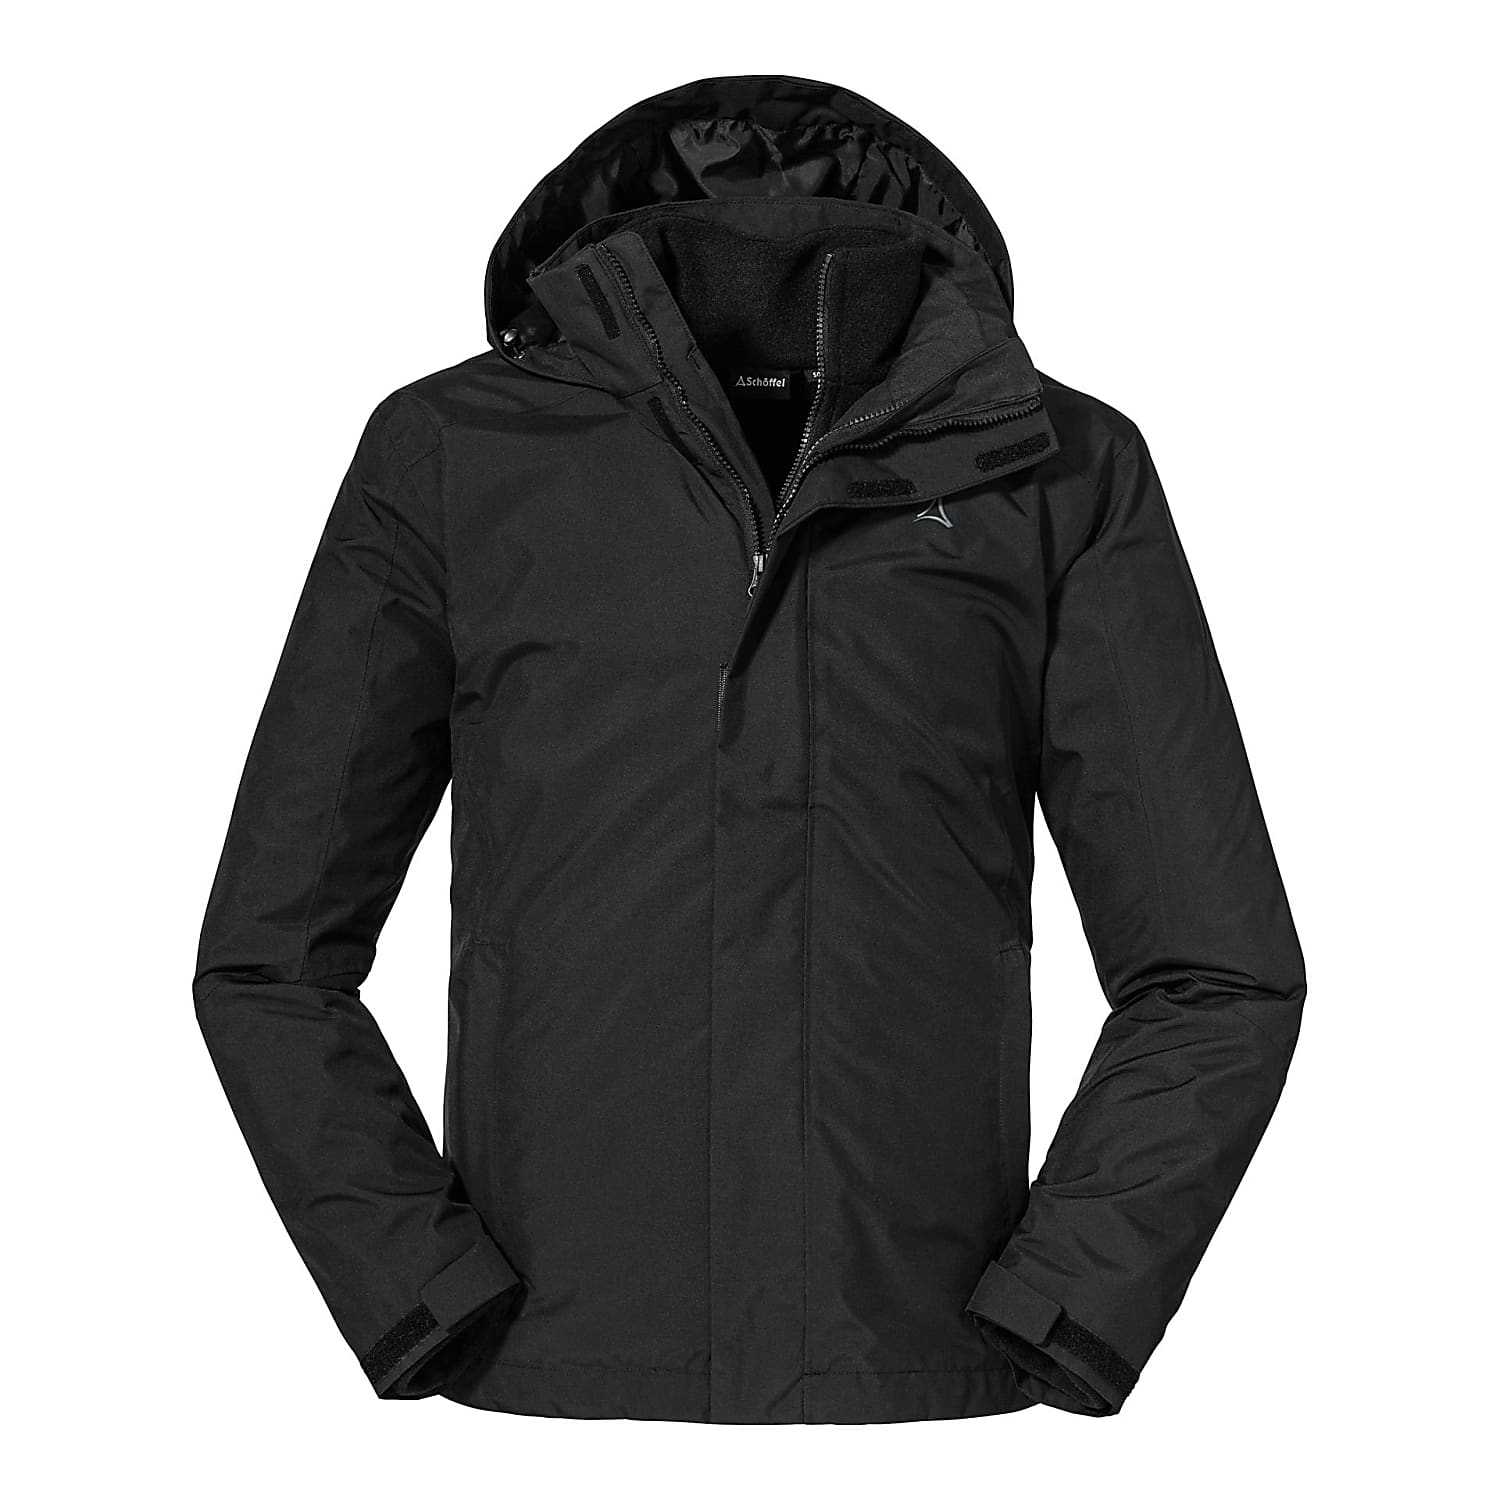 M 3IN1 and PARTINELLO, Black Fast - cheap Schoeffel shipping JACKET